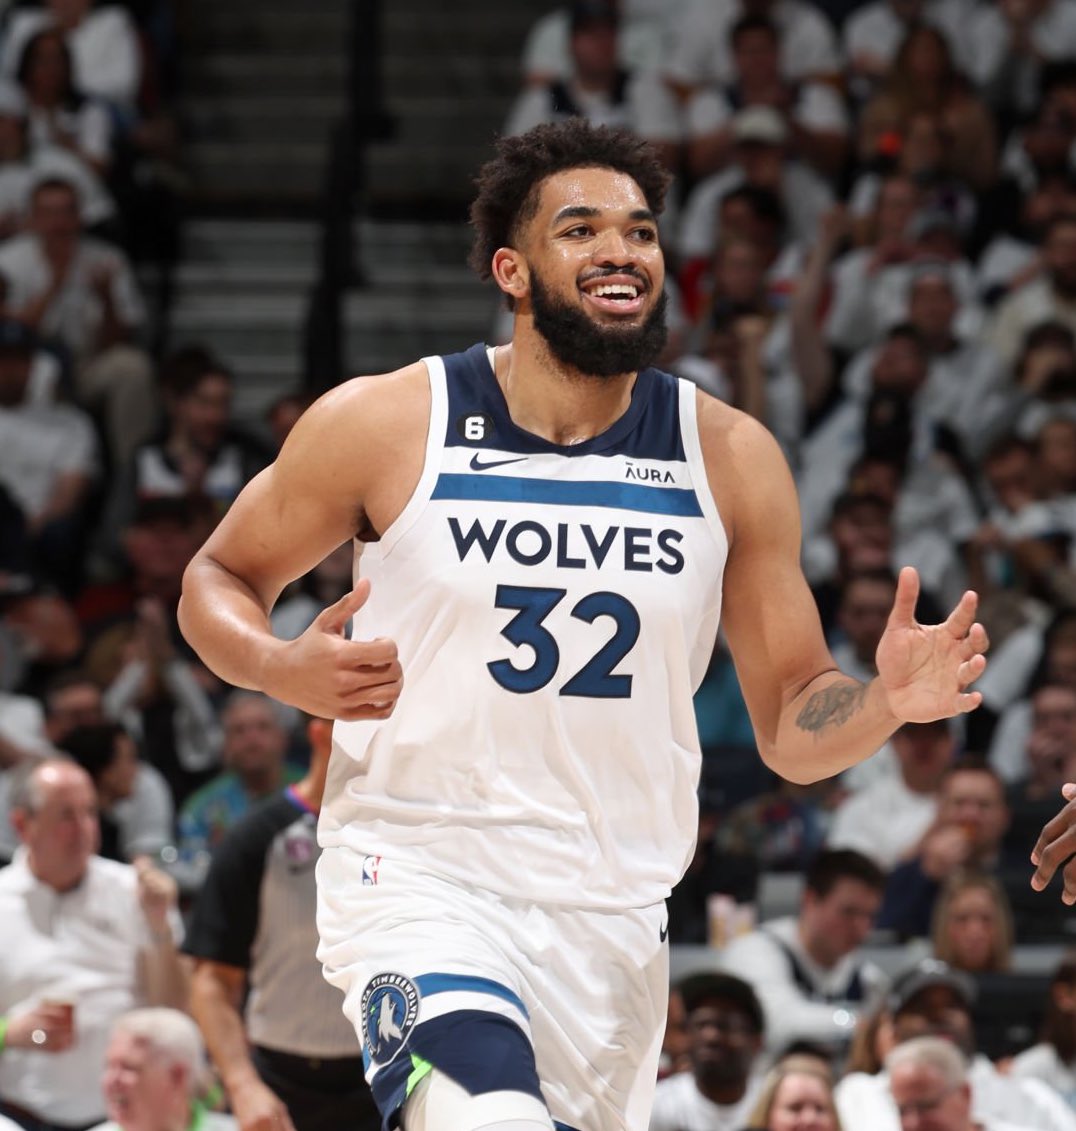 “When my time is up and I retire… there will be people that say I changed the game.” 

- Karl-Anthony Towns 

(Via @PatBevPod )